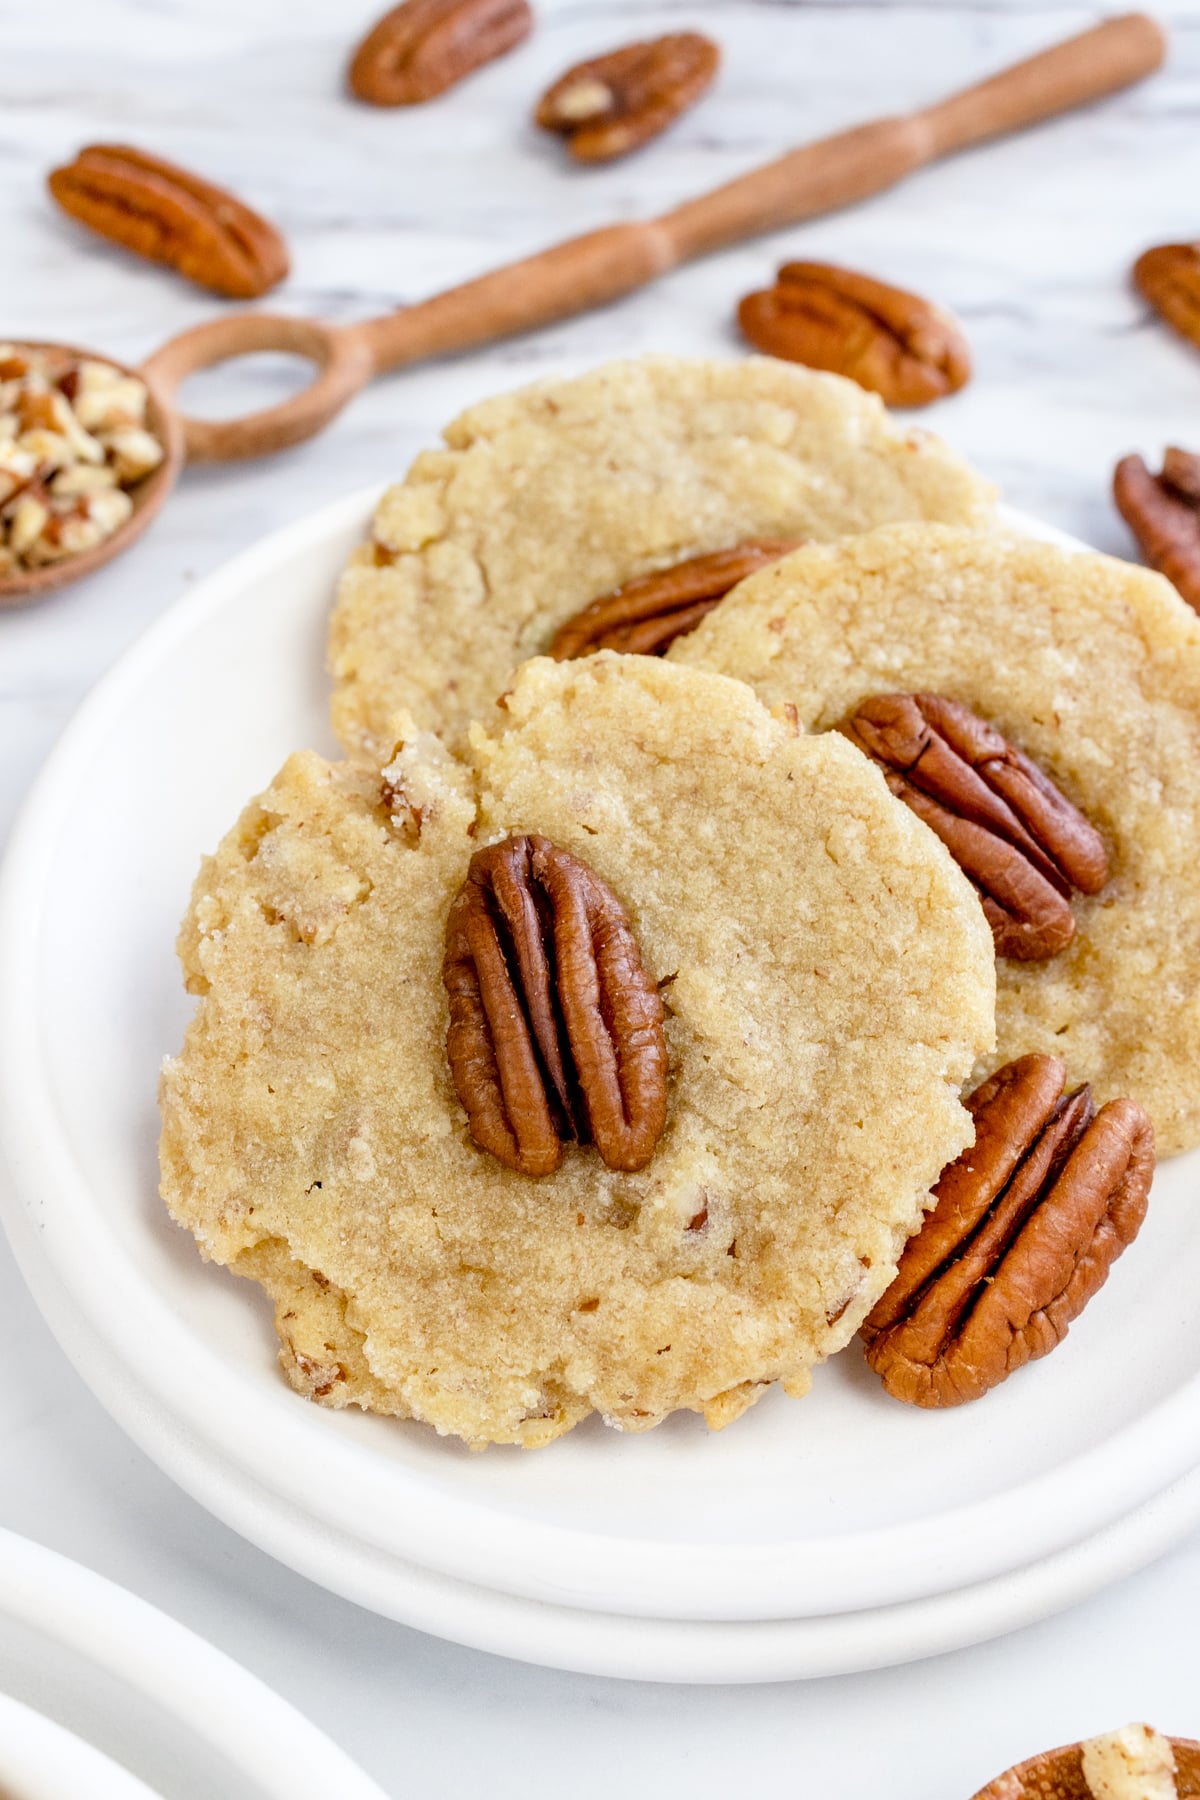 Top view close up of Pecan Sandies Cookies on a white plate.